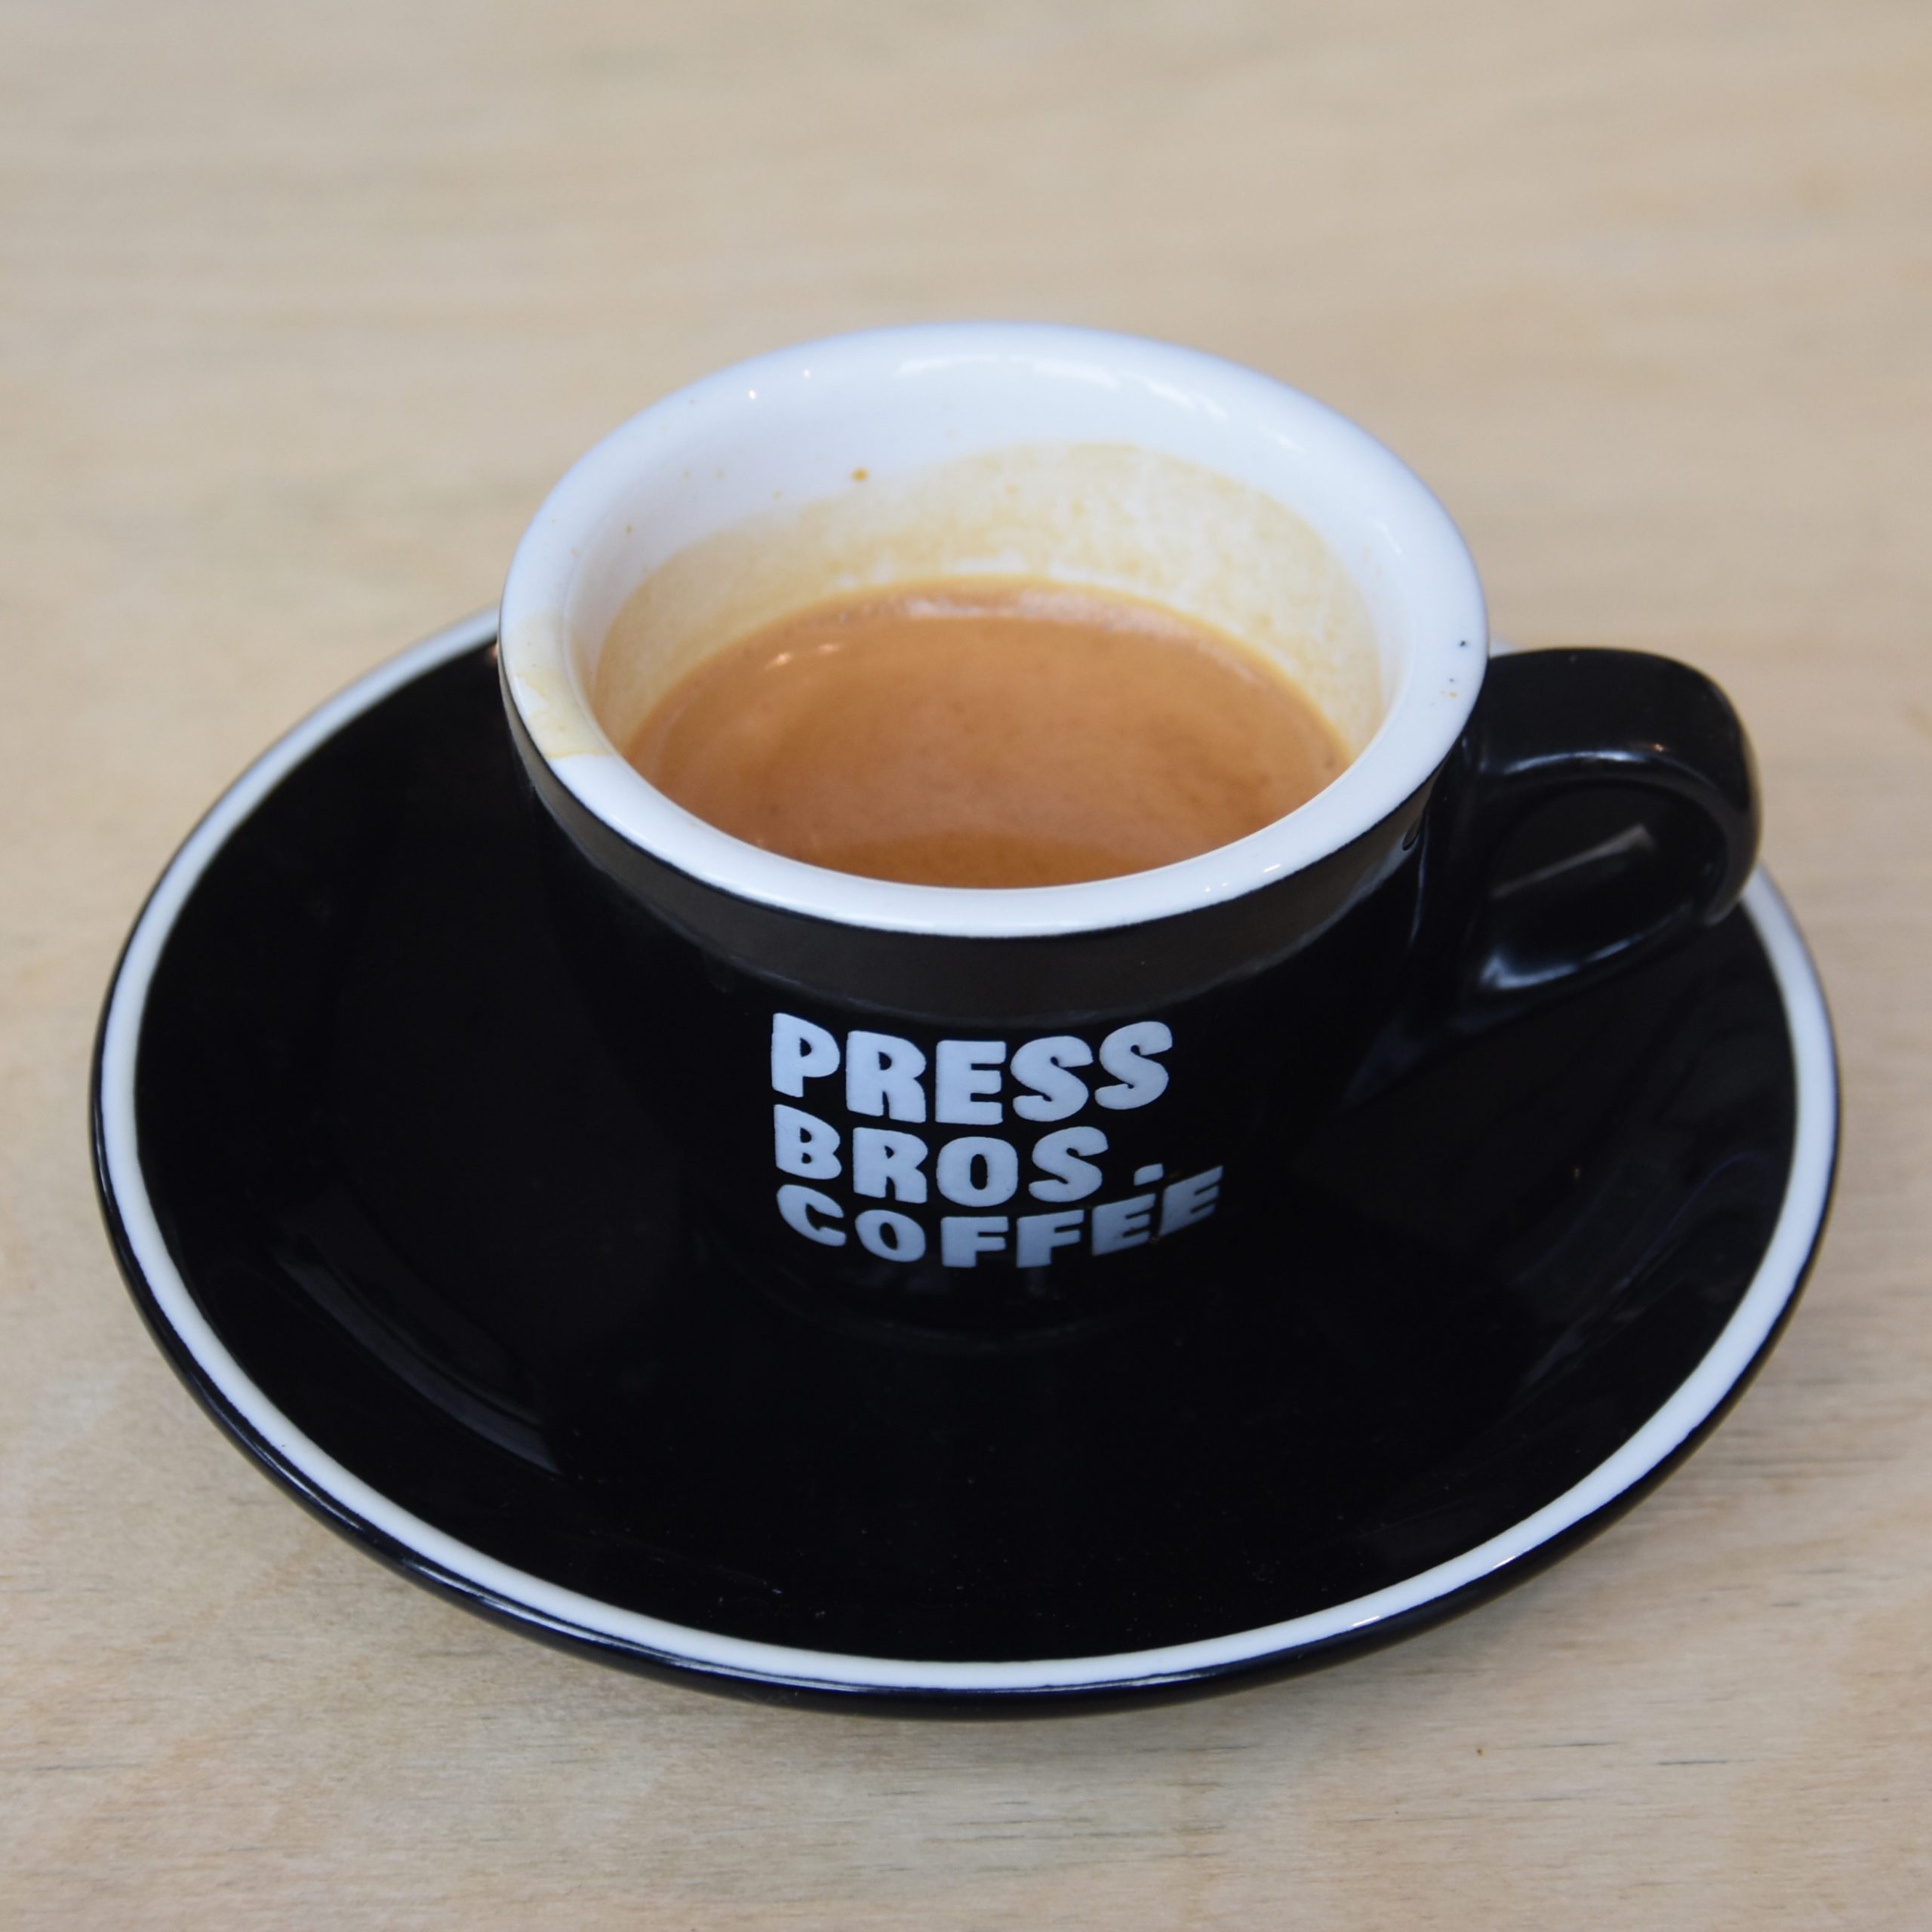 An espresso served in a classic black cup with the words "Press Bros. Coffee" on the front.